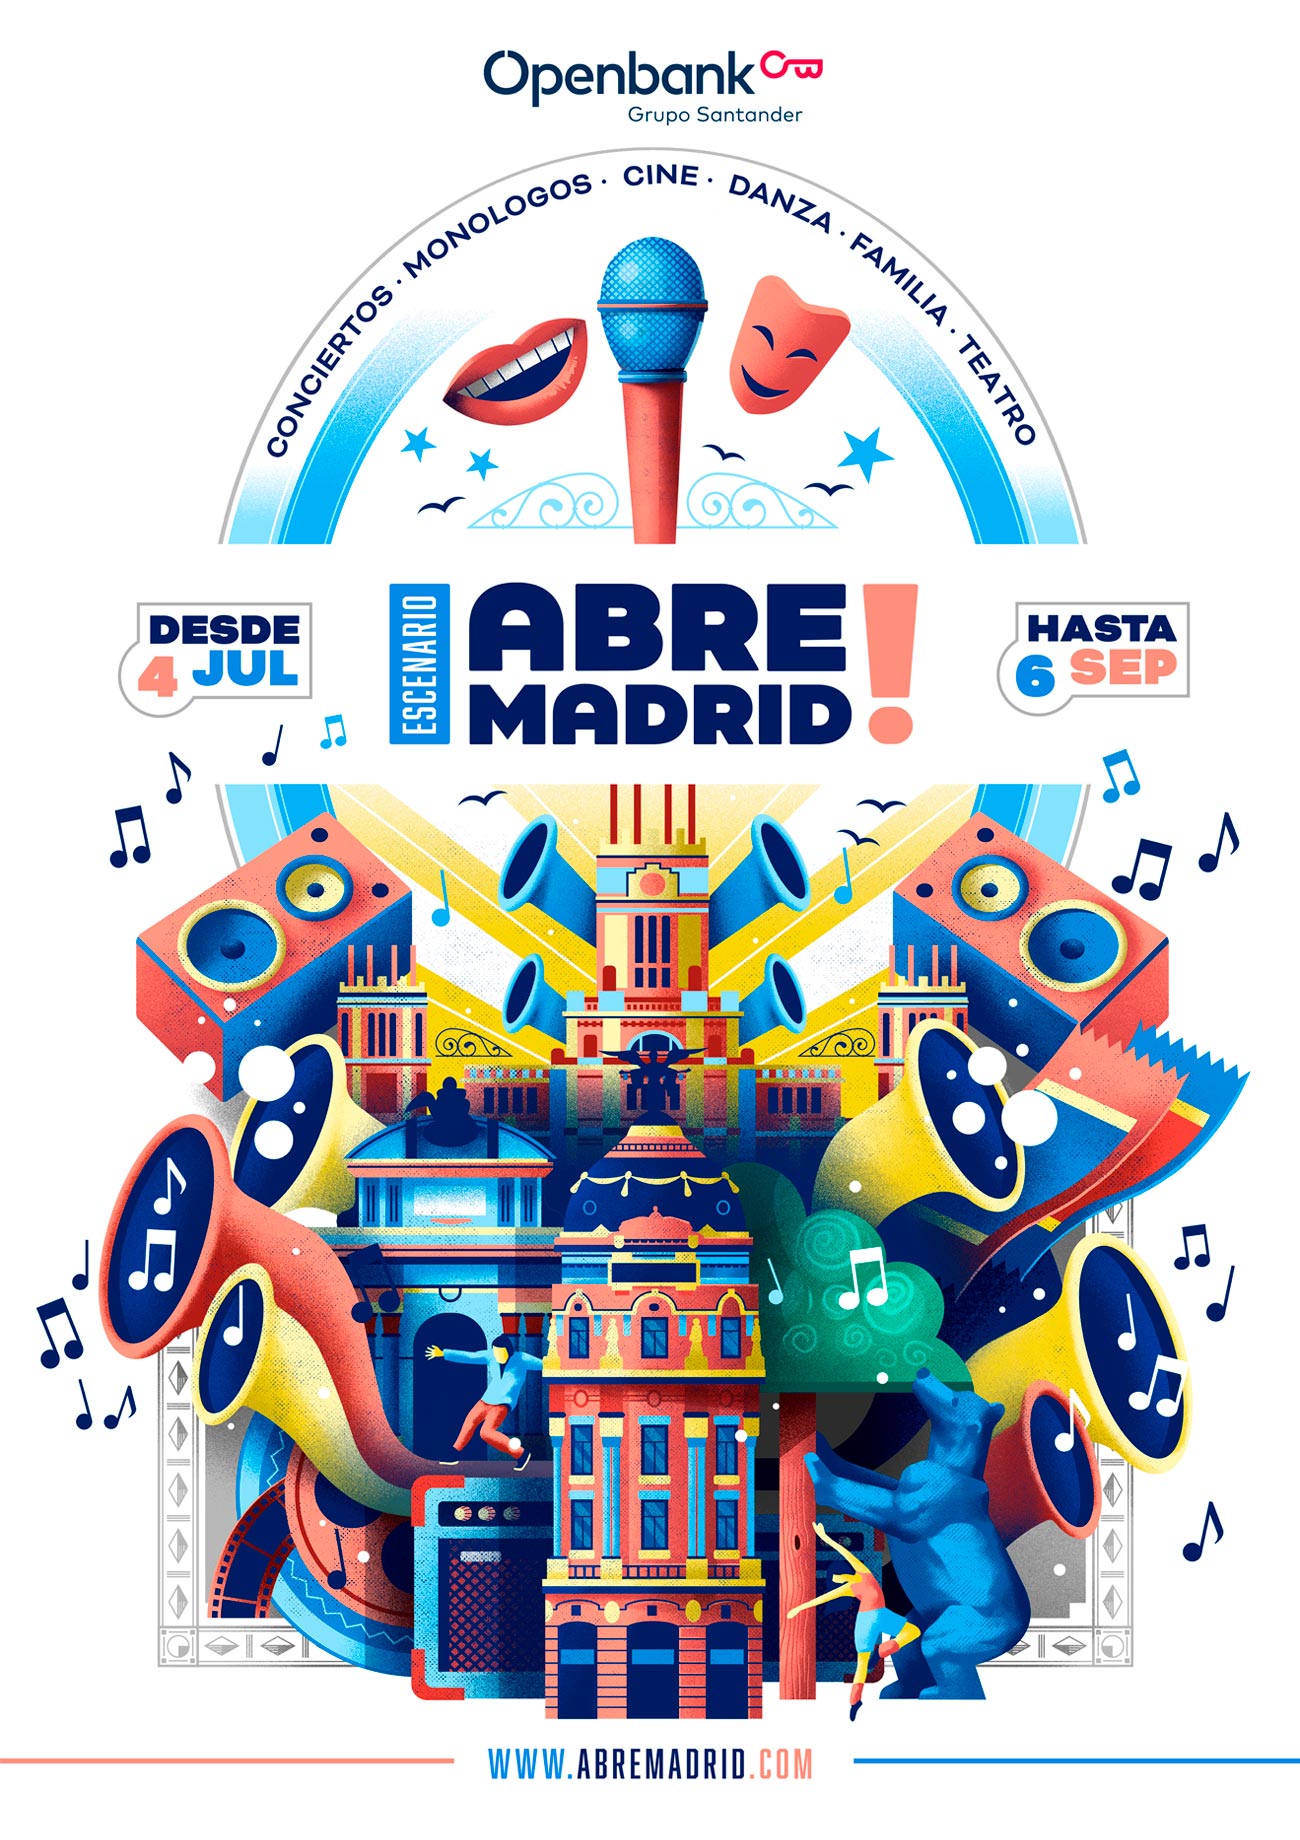 Poster design for Abre Madrid by Sr.Reny